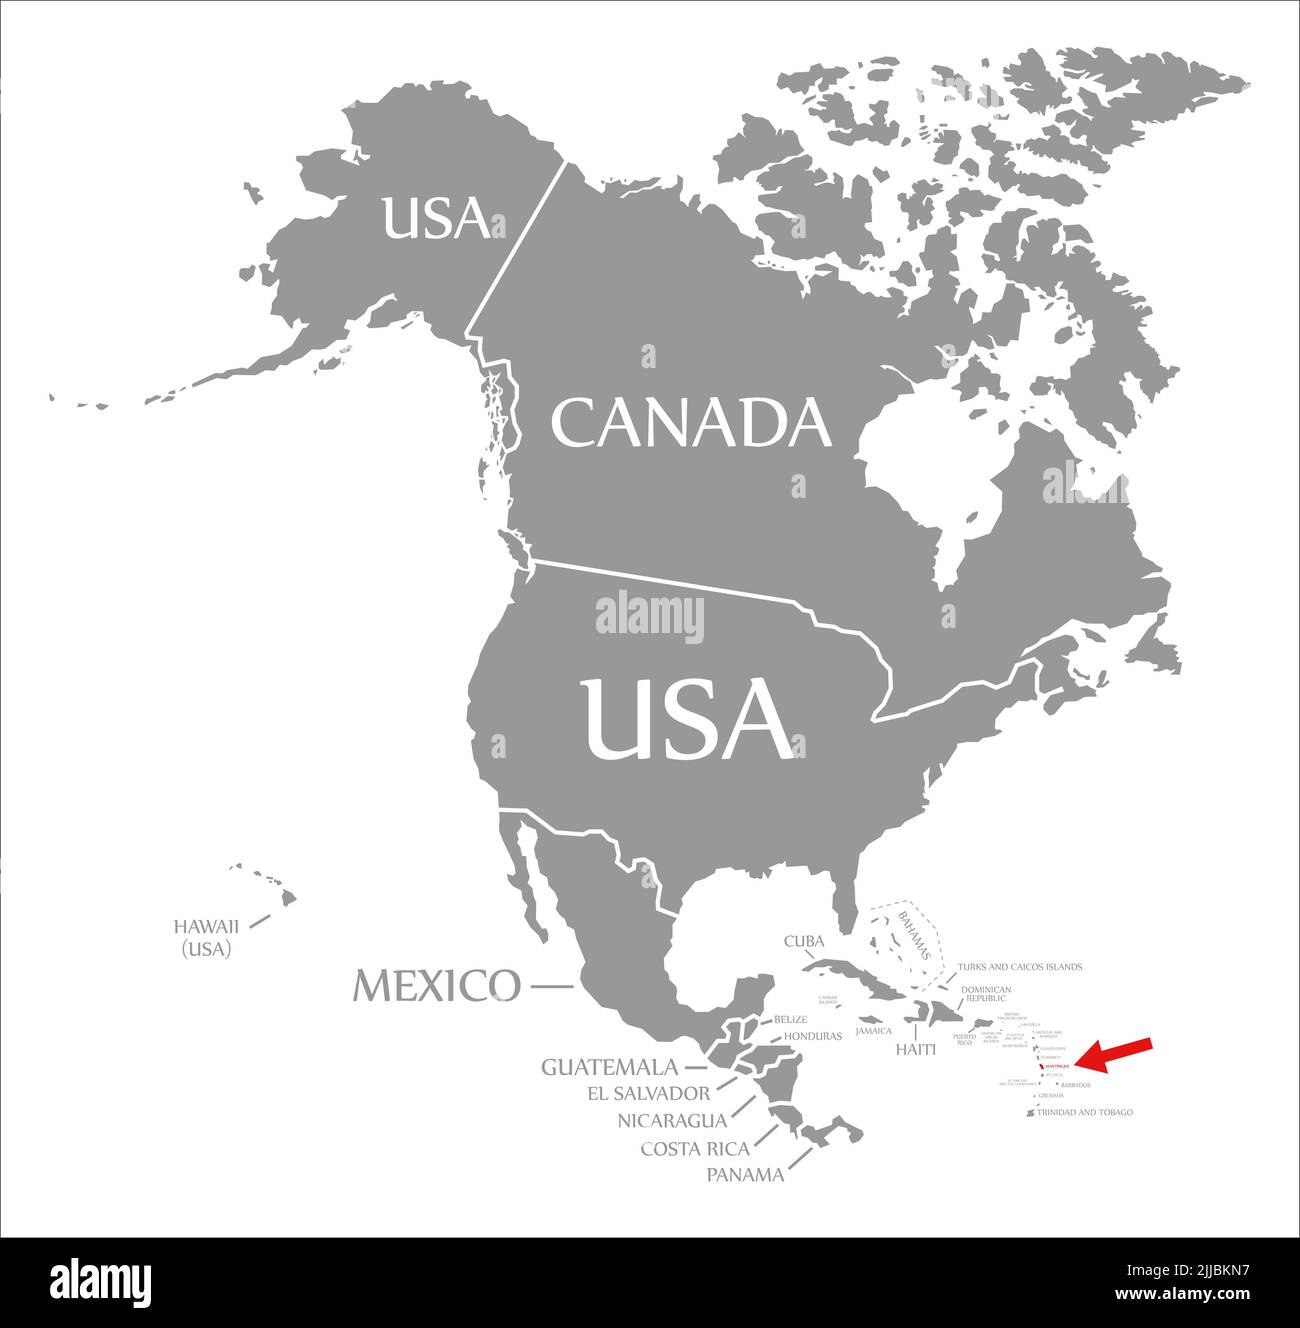 Martinique red highlighted in map of North America Stock Photo